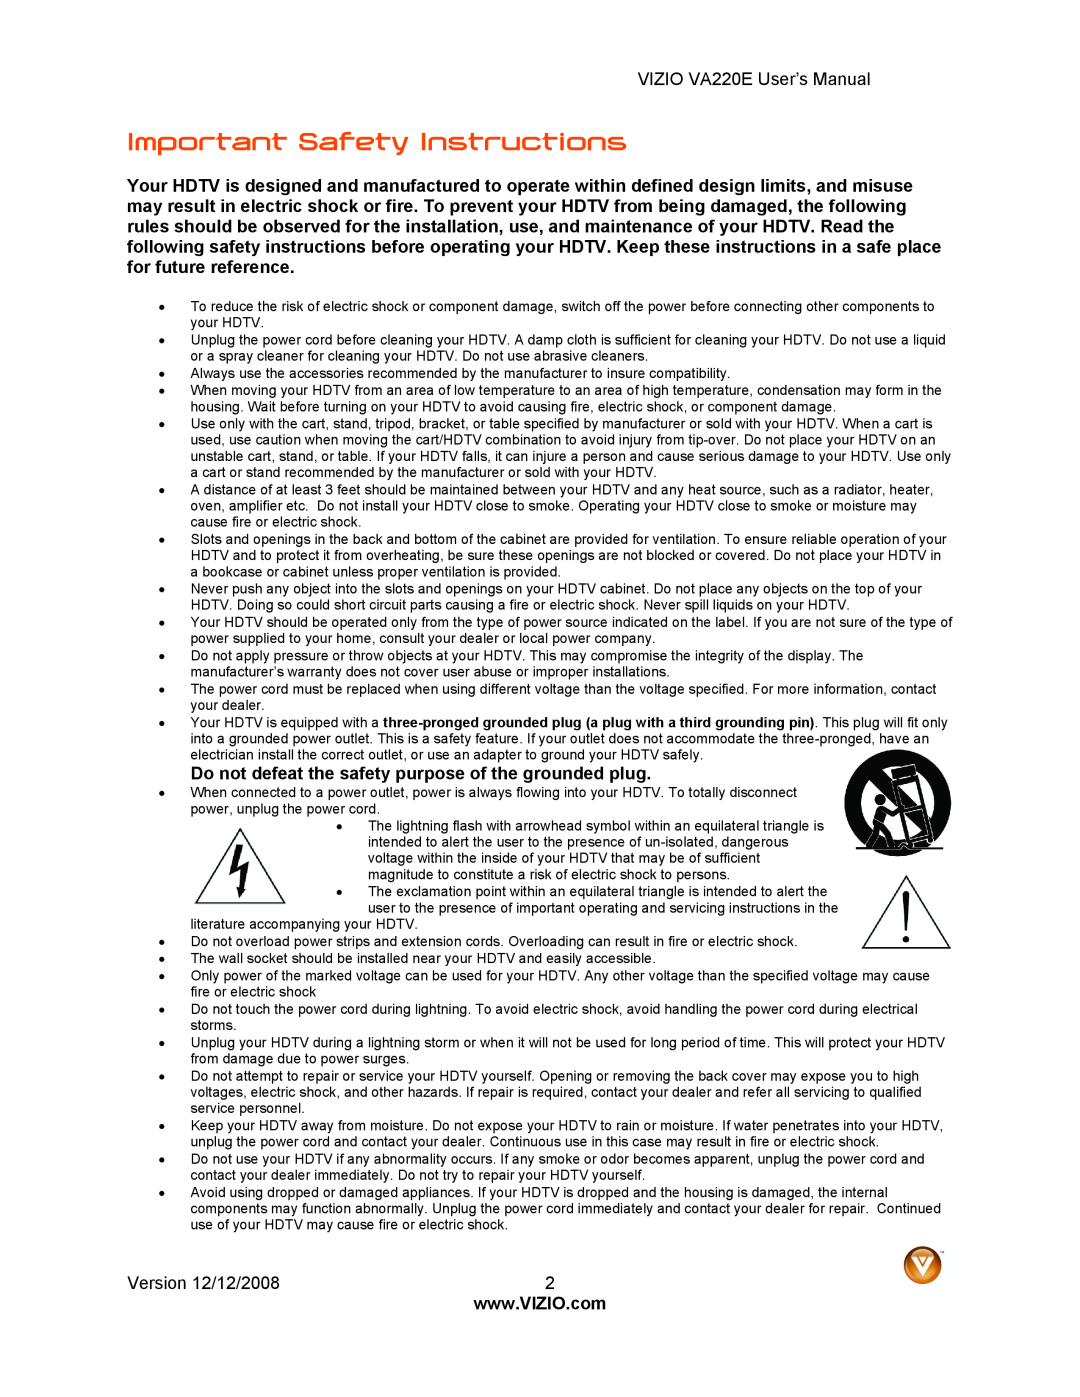 Vizio VA220E user manual Important Safety Instructions, Do not defeat the safety purpose of the grounded plug 